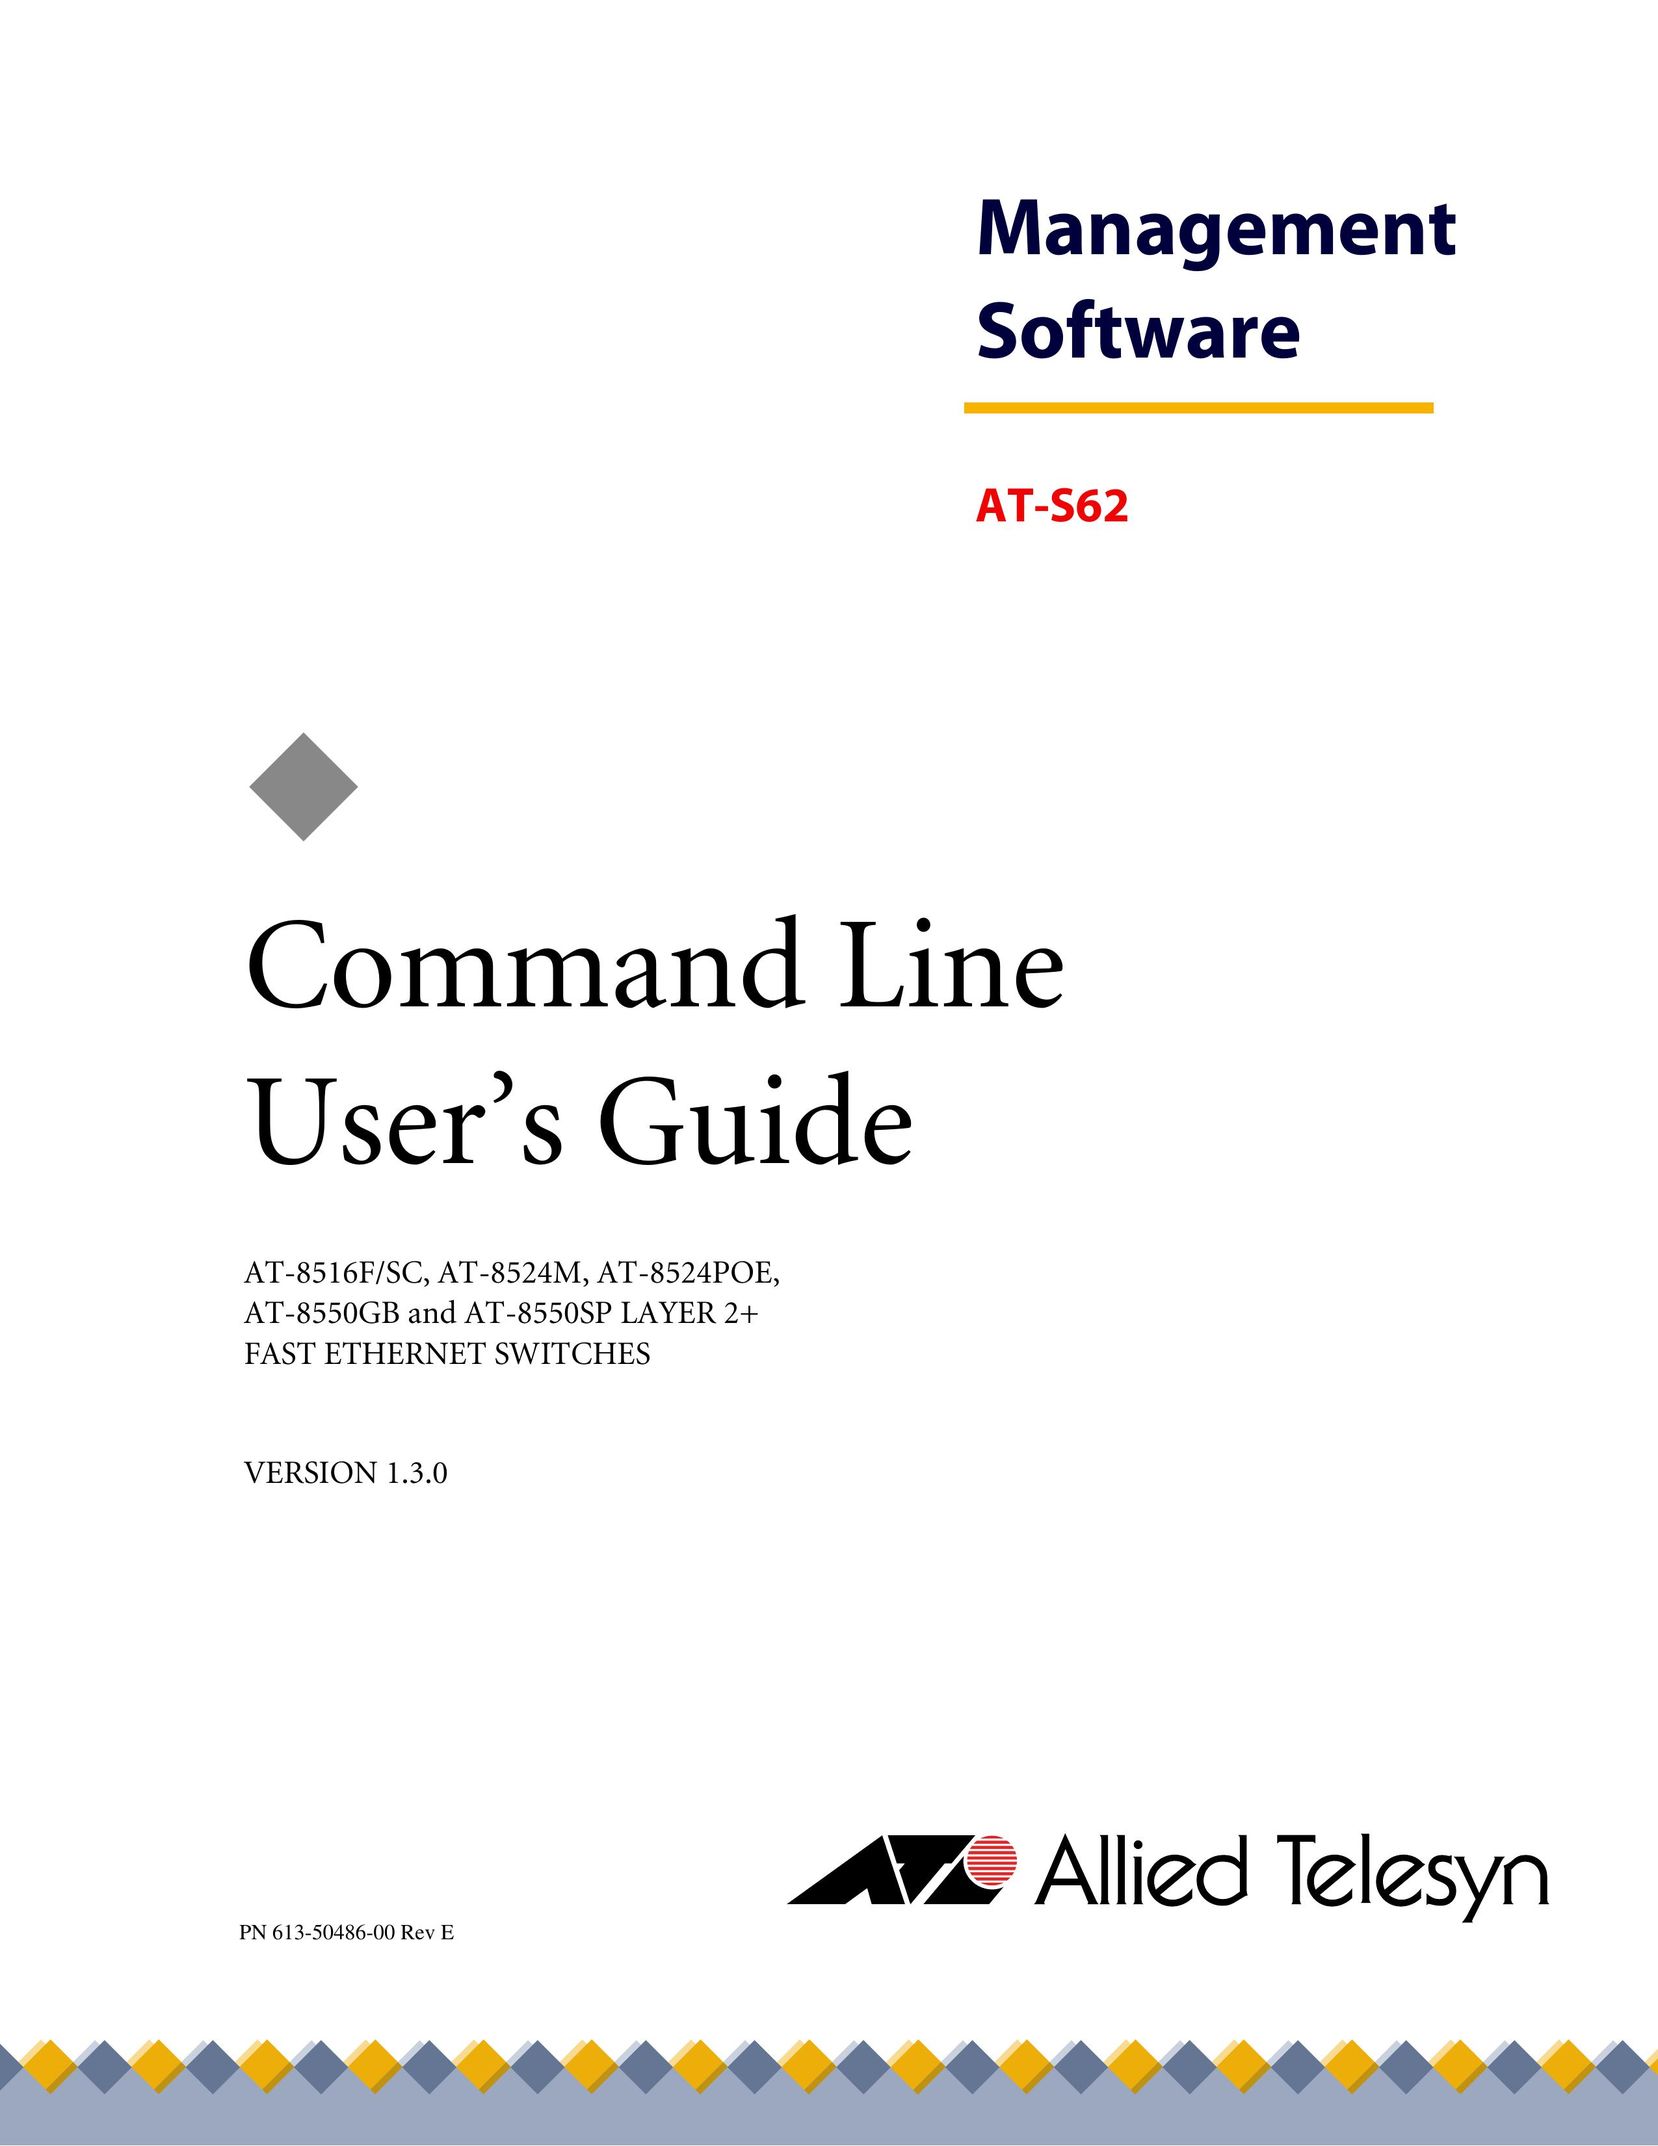 Allied Telesis management software layer 2+ fast ethernet switches Webcam User Manual